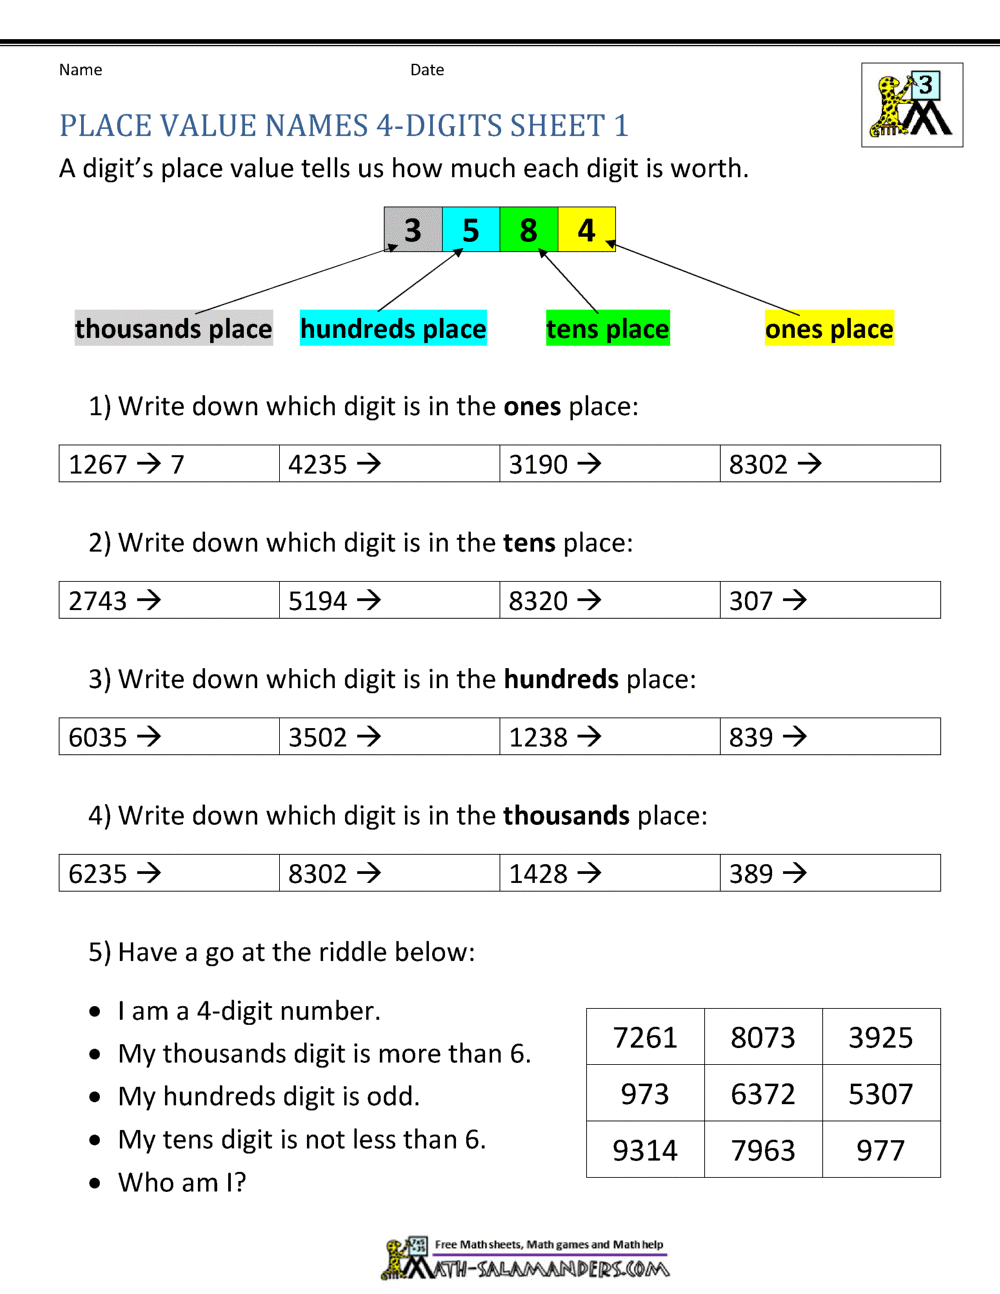 Generalize Place Value Understanding For Multi Digit Whole Numbers Worksheets